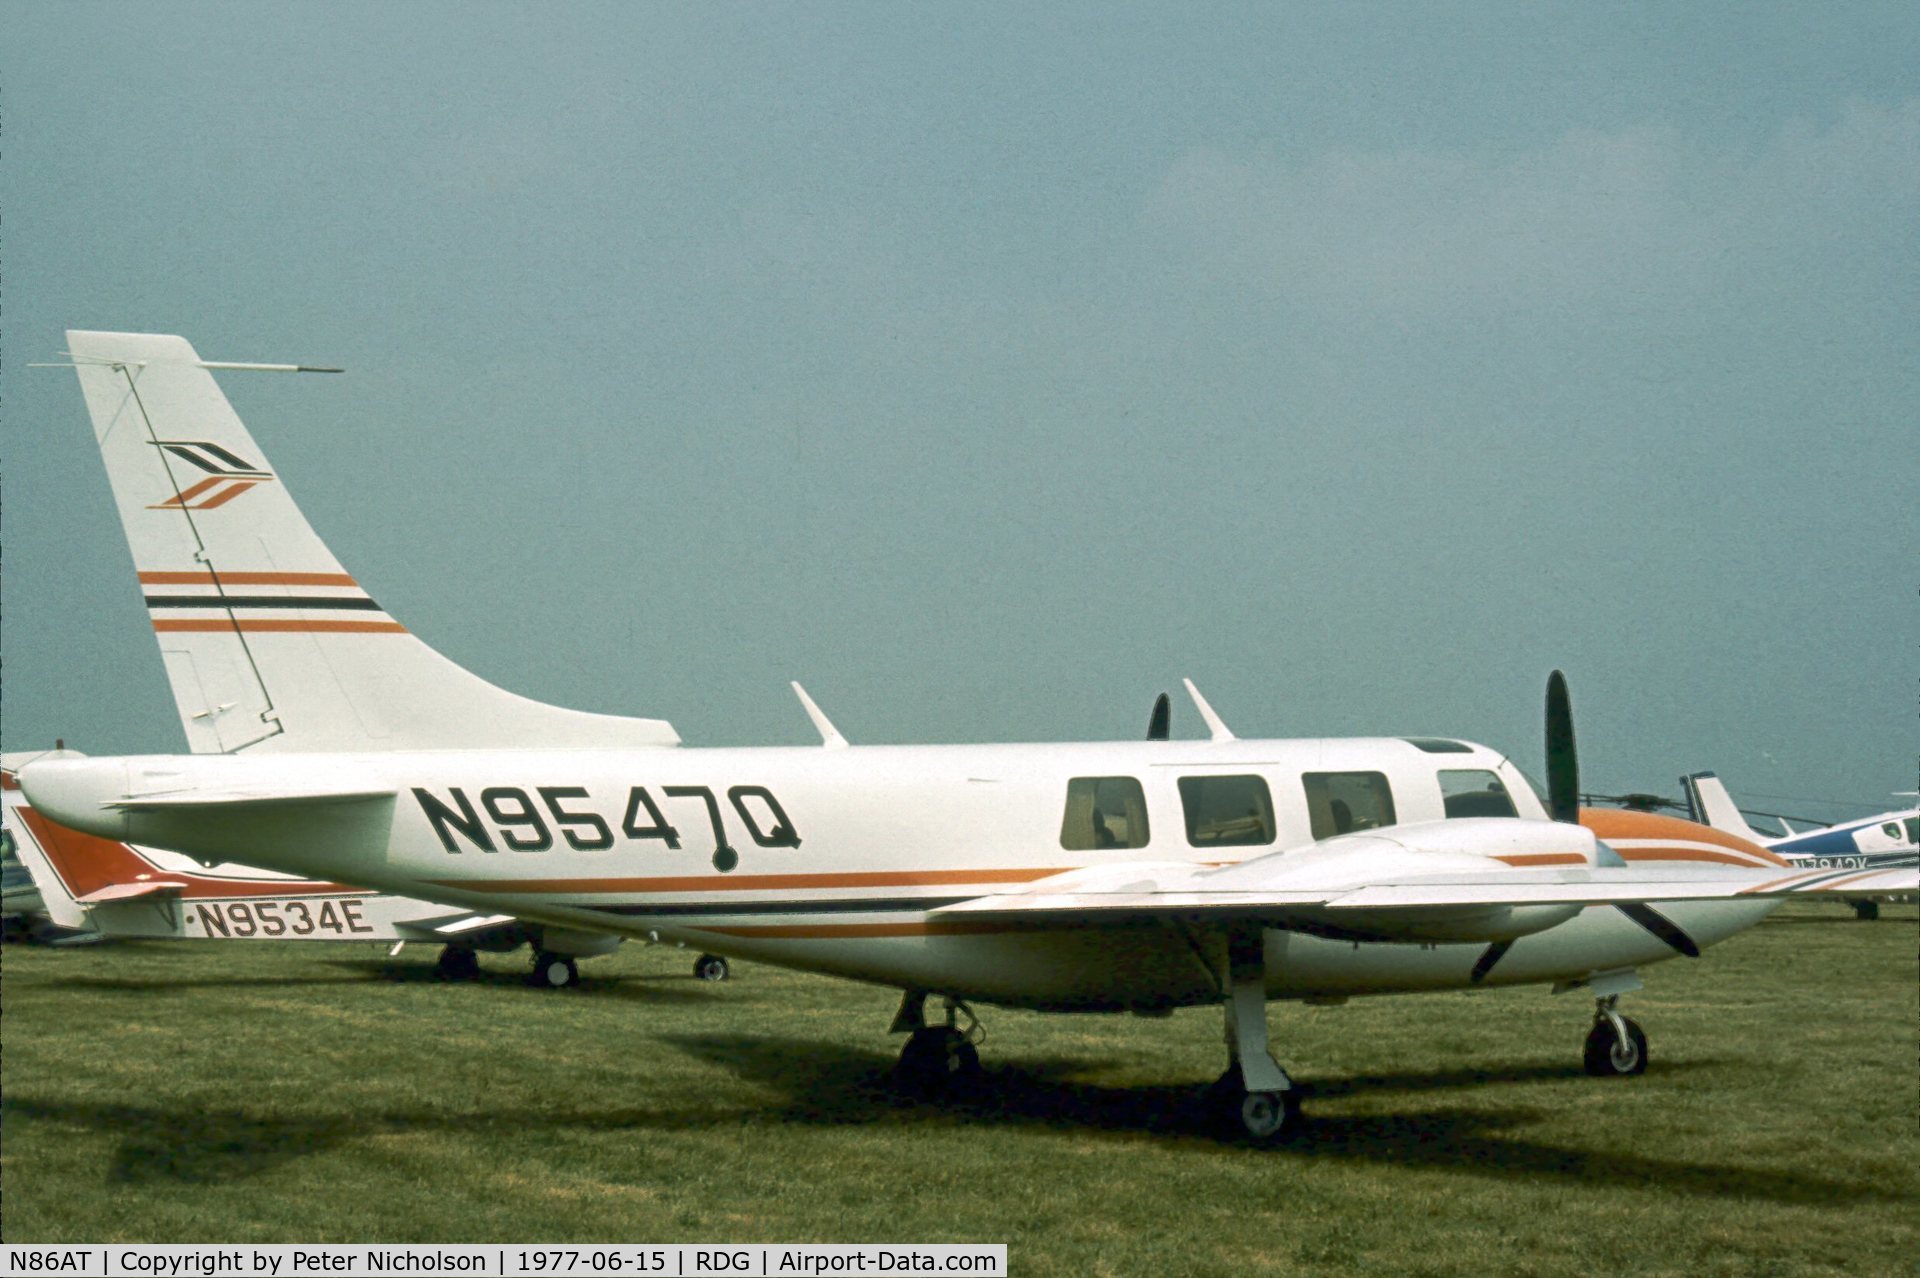 N86AT, 1976 Smith Aerostar 601P C/N 61P-0364-114, In 1977 this was known as a Ted Smith Aerostar 601P and as such was seen at the 1977 Reading Airshow.